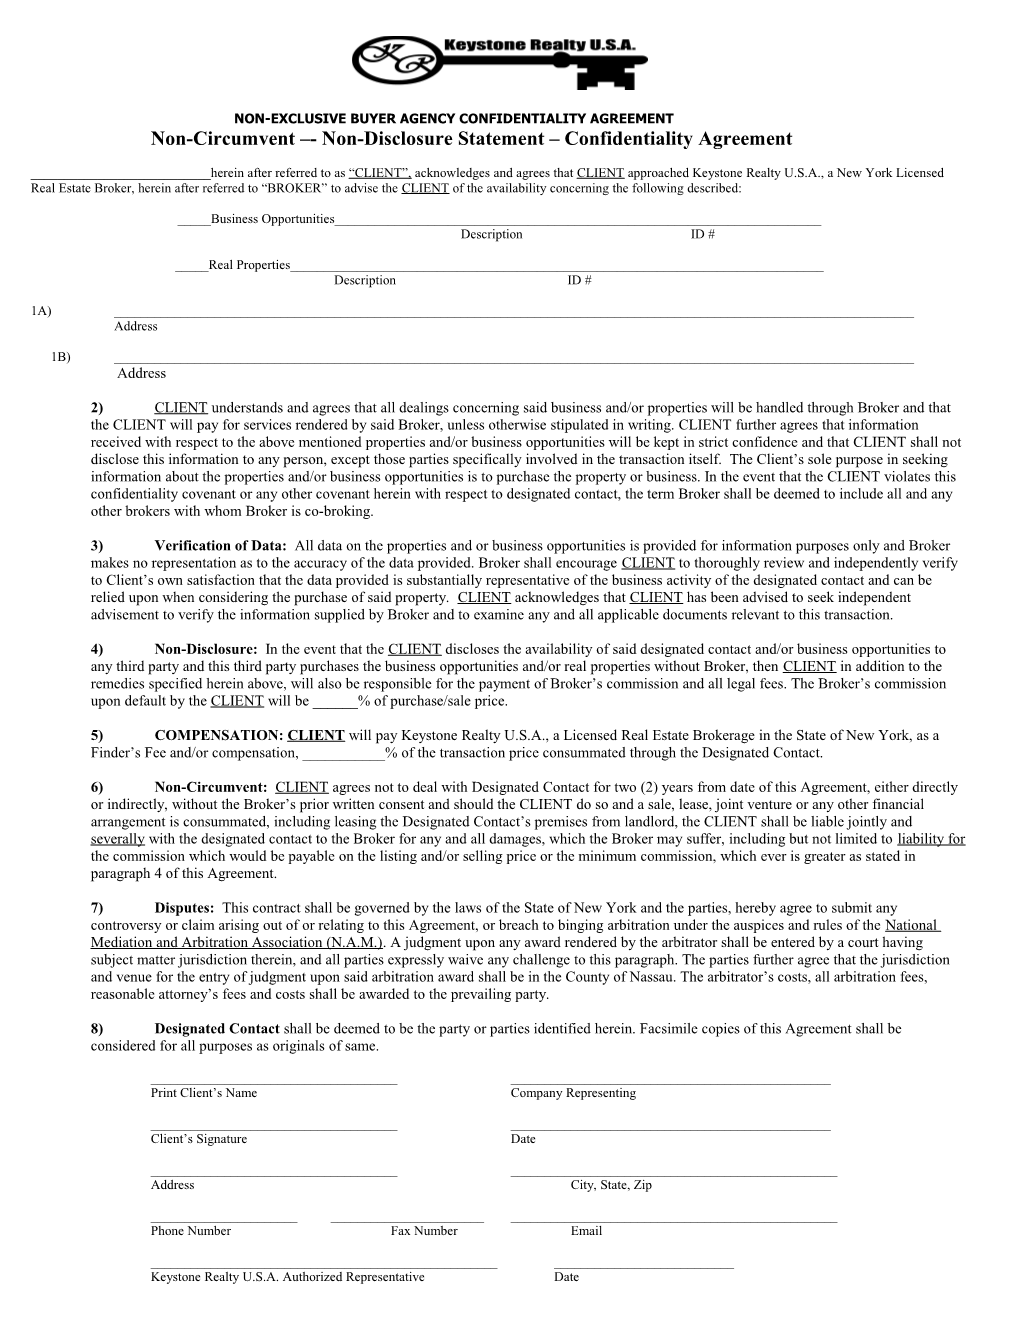 Non-Exclusive Buyer Agency Confidentiality Agreement